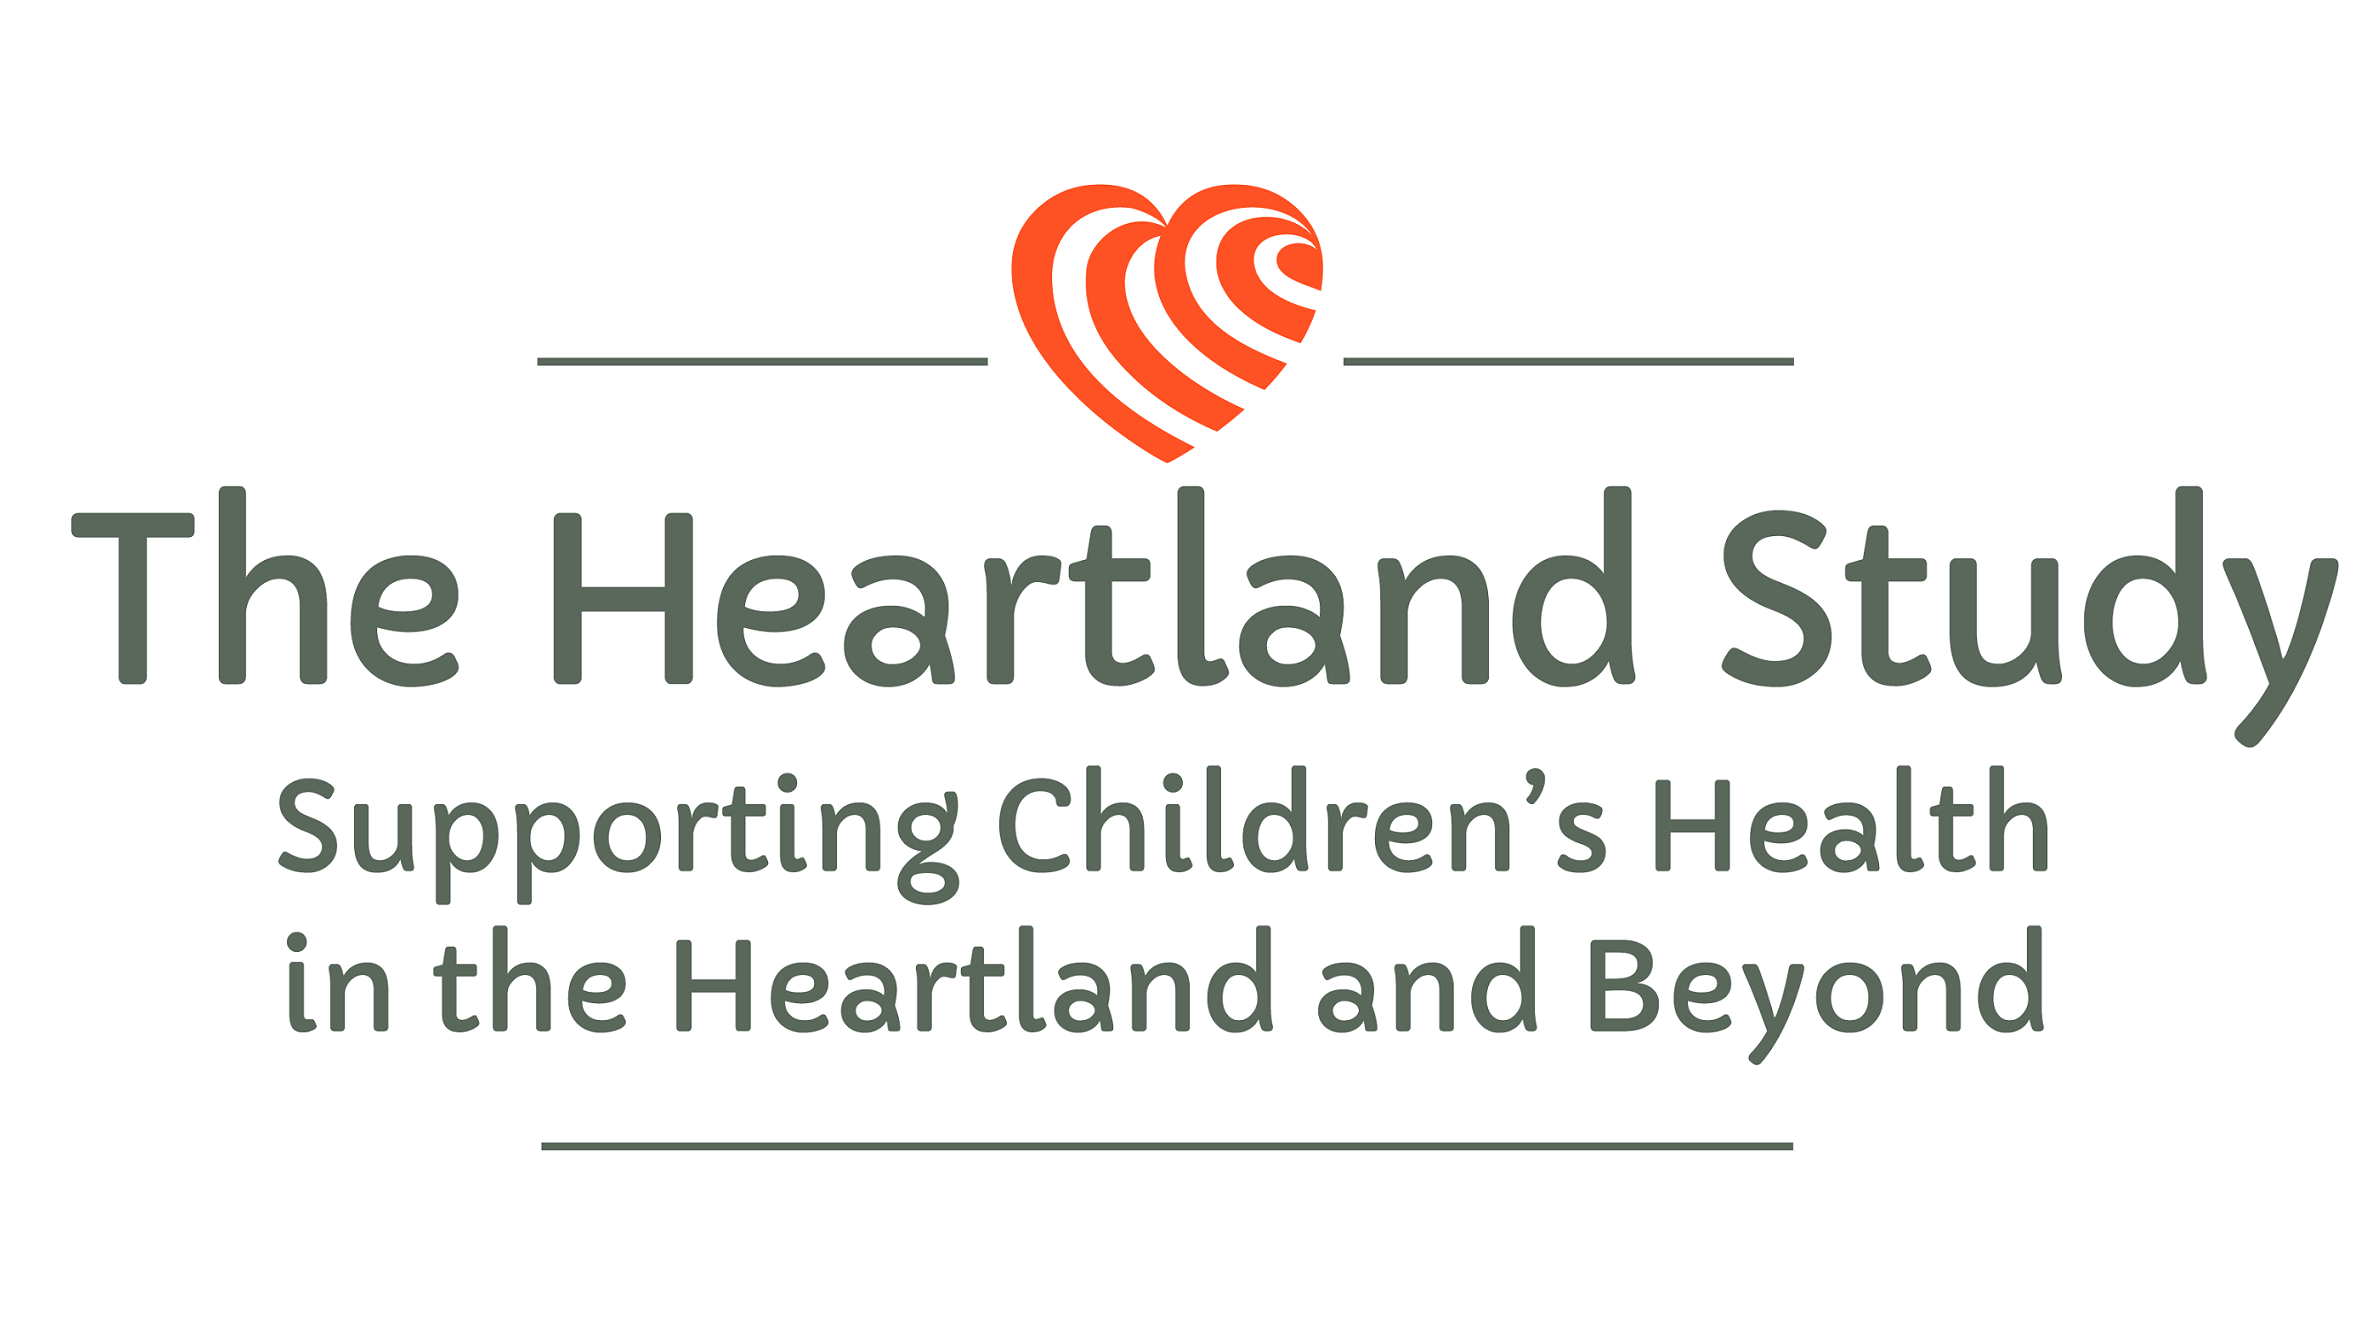 ARE YOU PREGNANT OR A NEWLY EXPECTING MOM?  JOIN THE HEARTLAND STUDY!